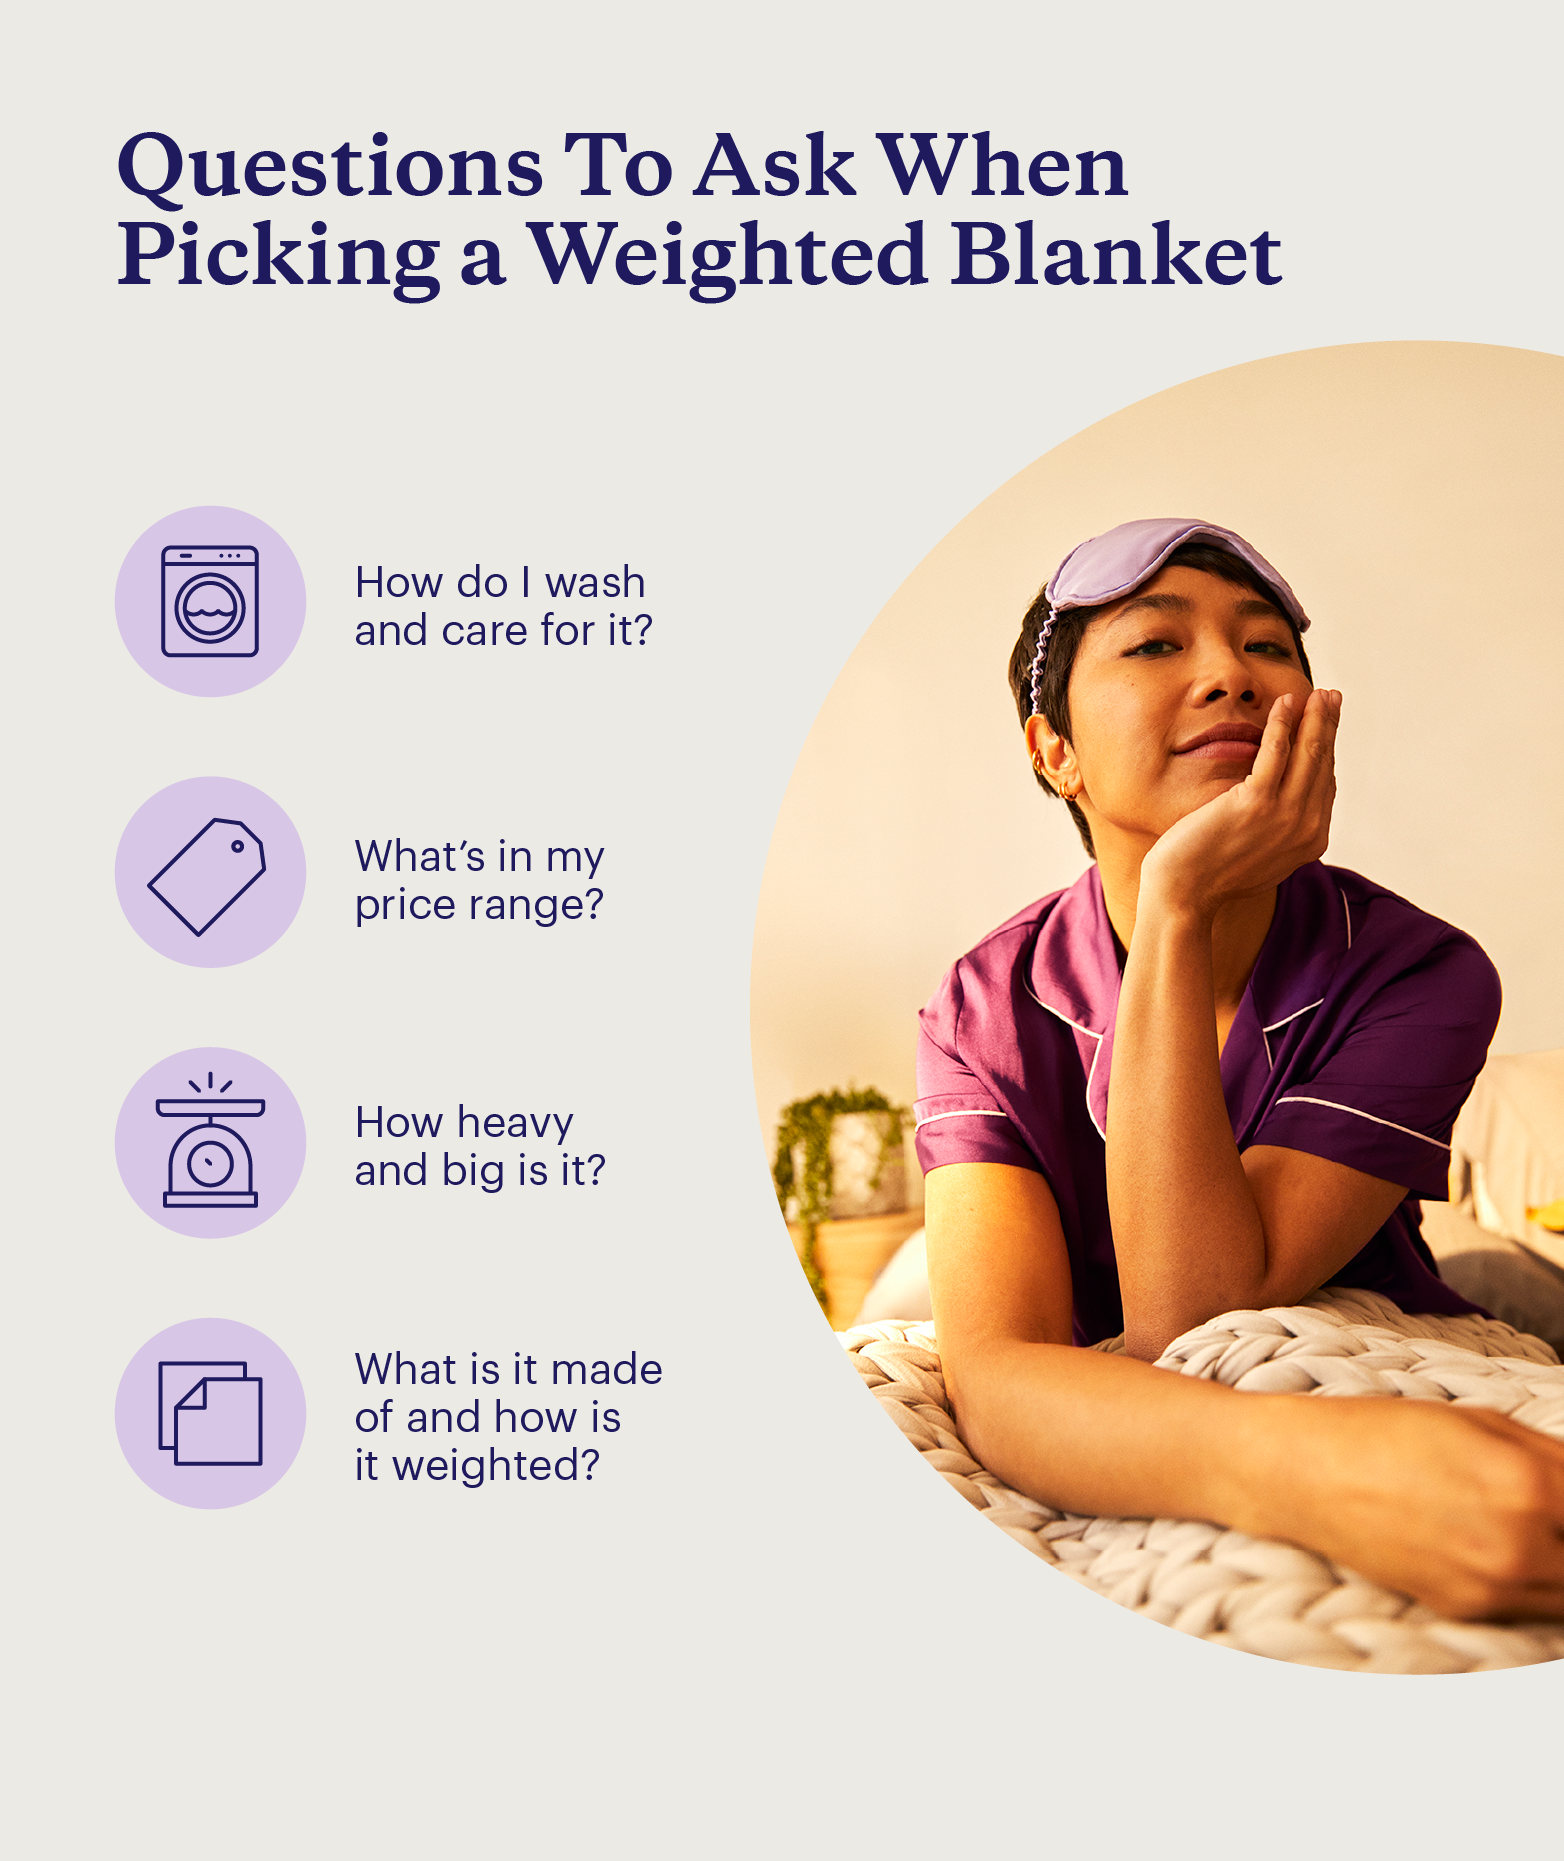 Photo of a person in bed with a weighted blanket and a list of criteria to consider when choosing a weighted blanket.